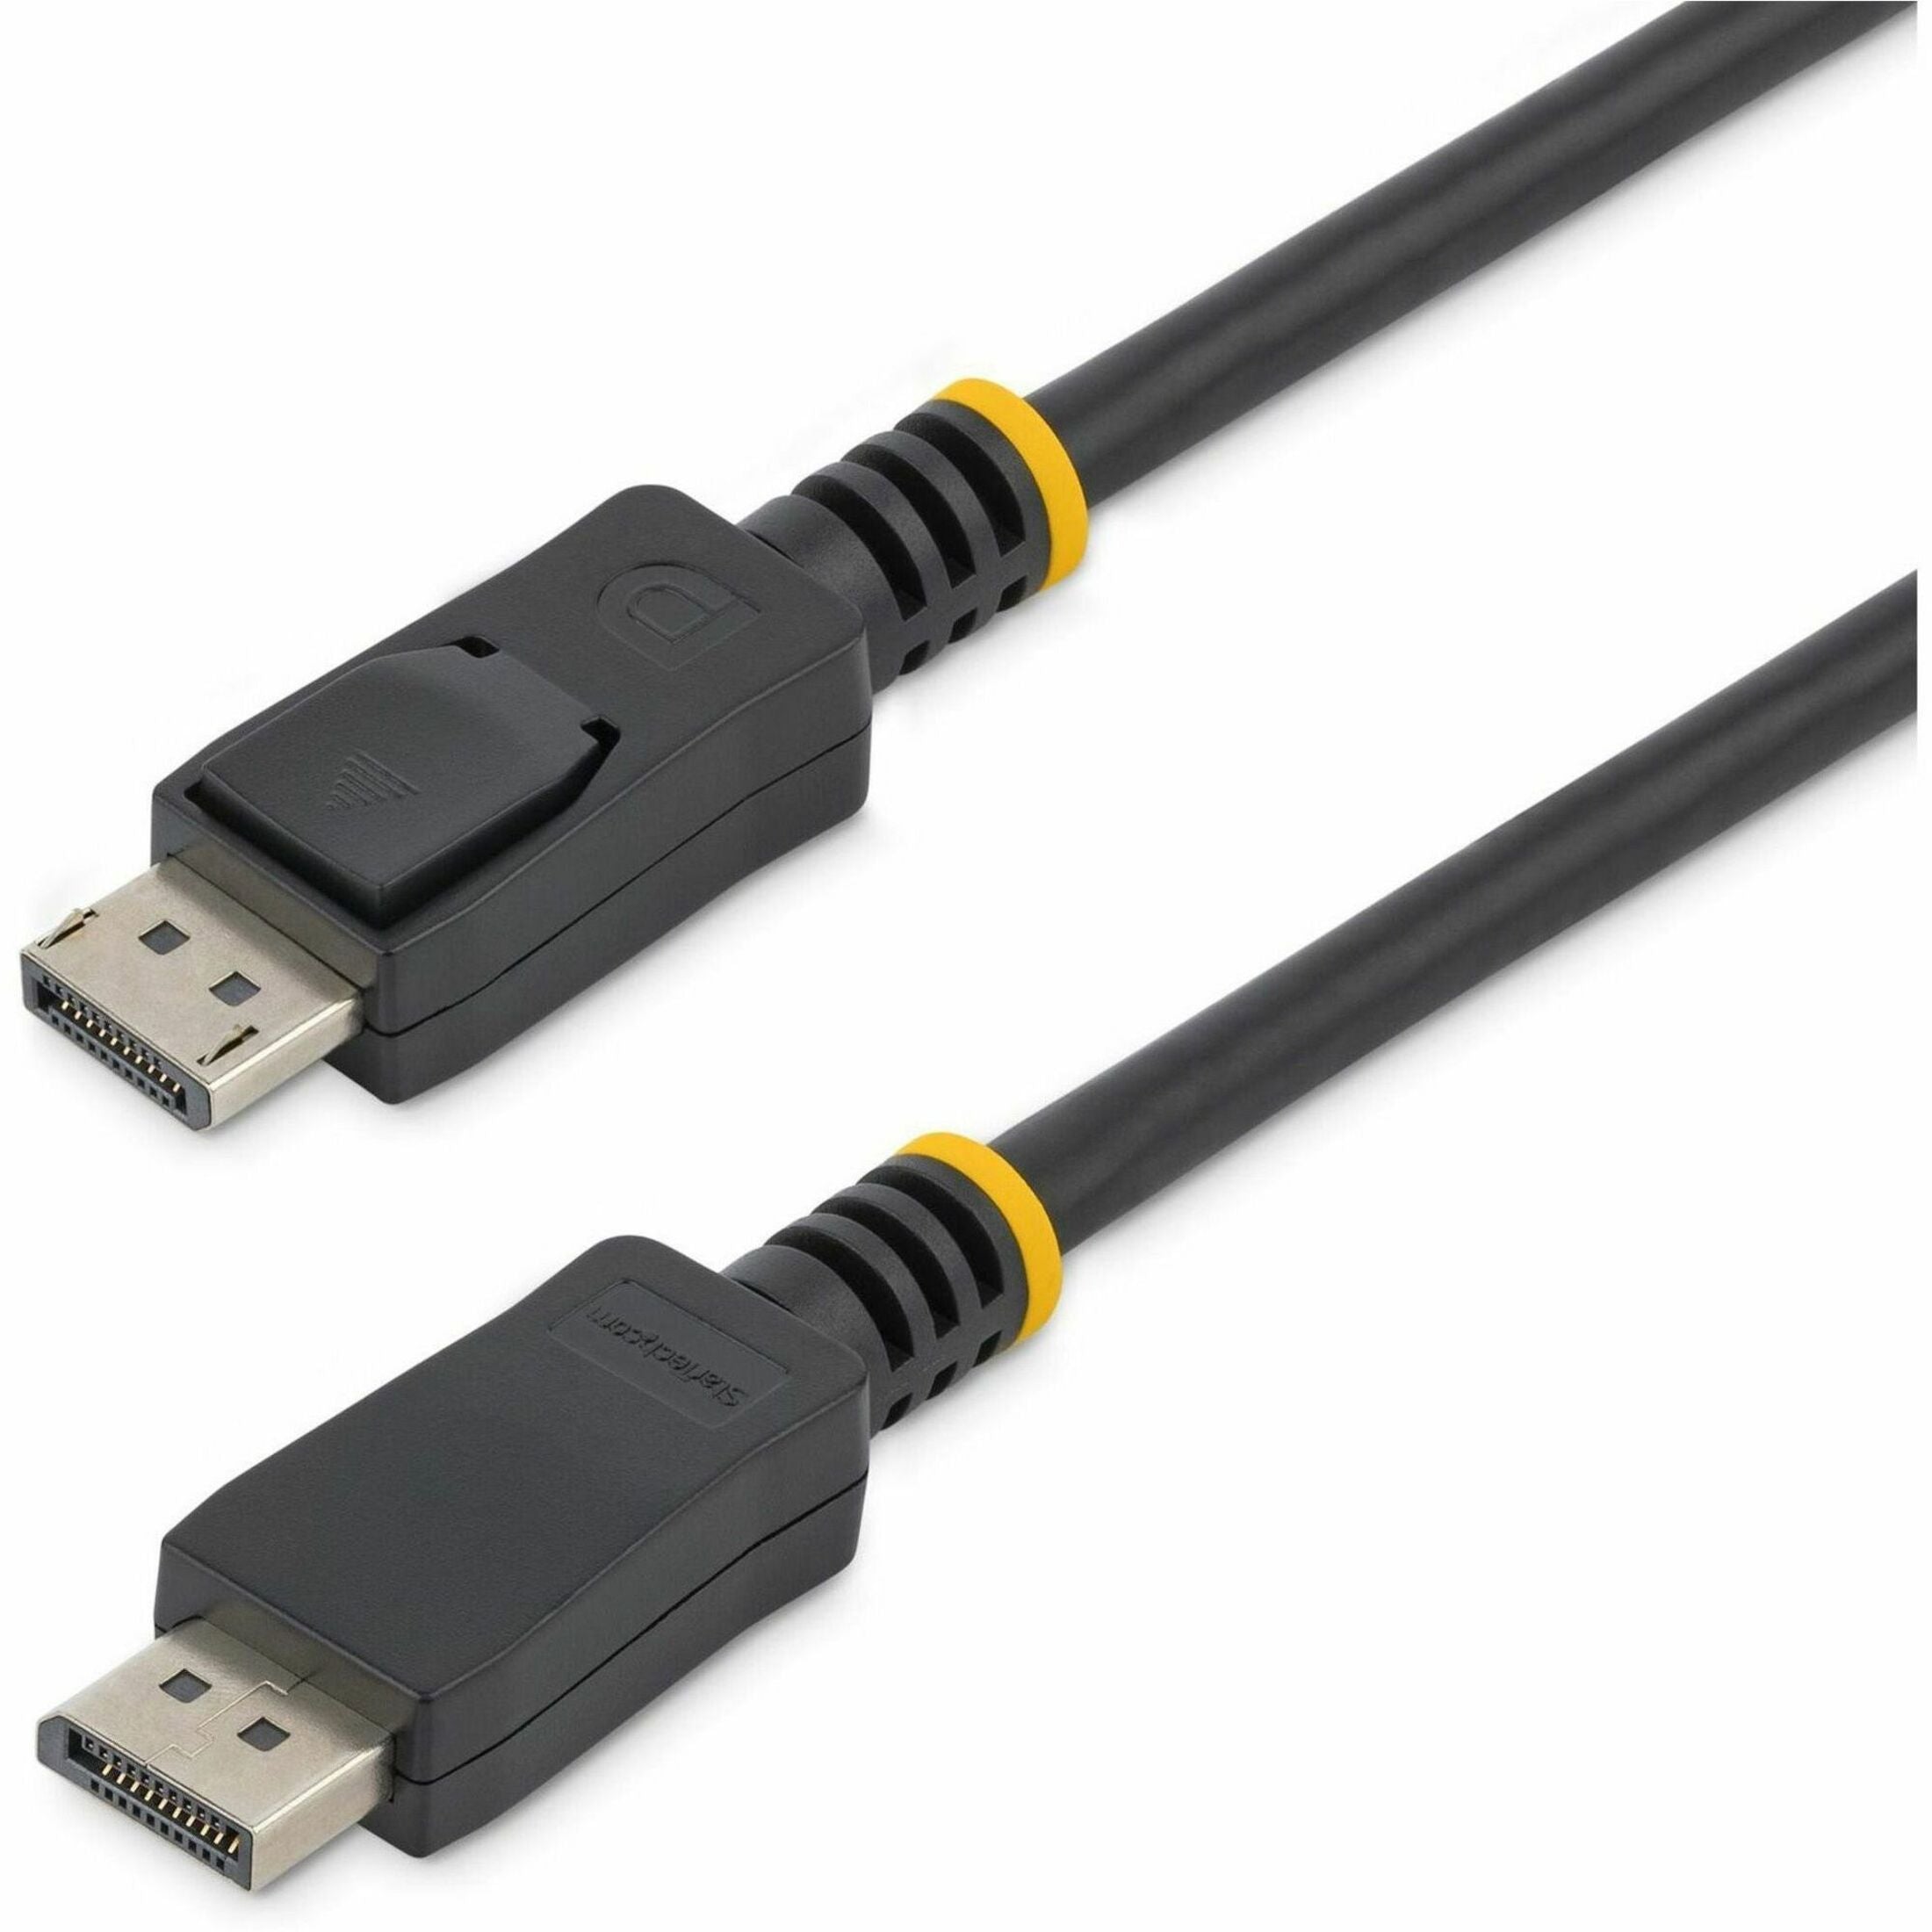 StarTech.com DISPLPORT1L 1 ft Short DisplayPort 1.2 Cable with Latches M/M, 4k Video Cable